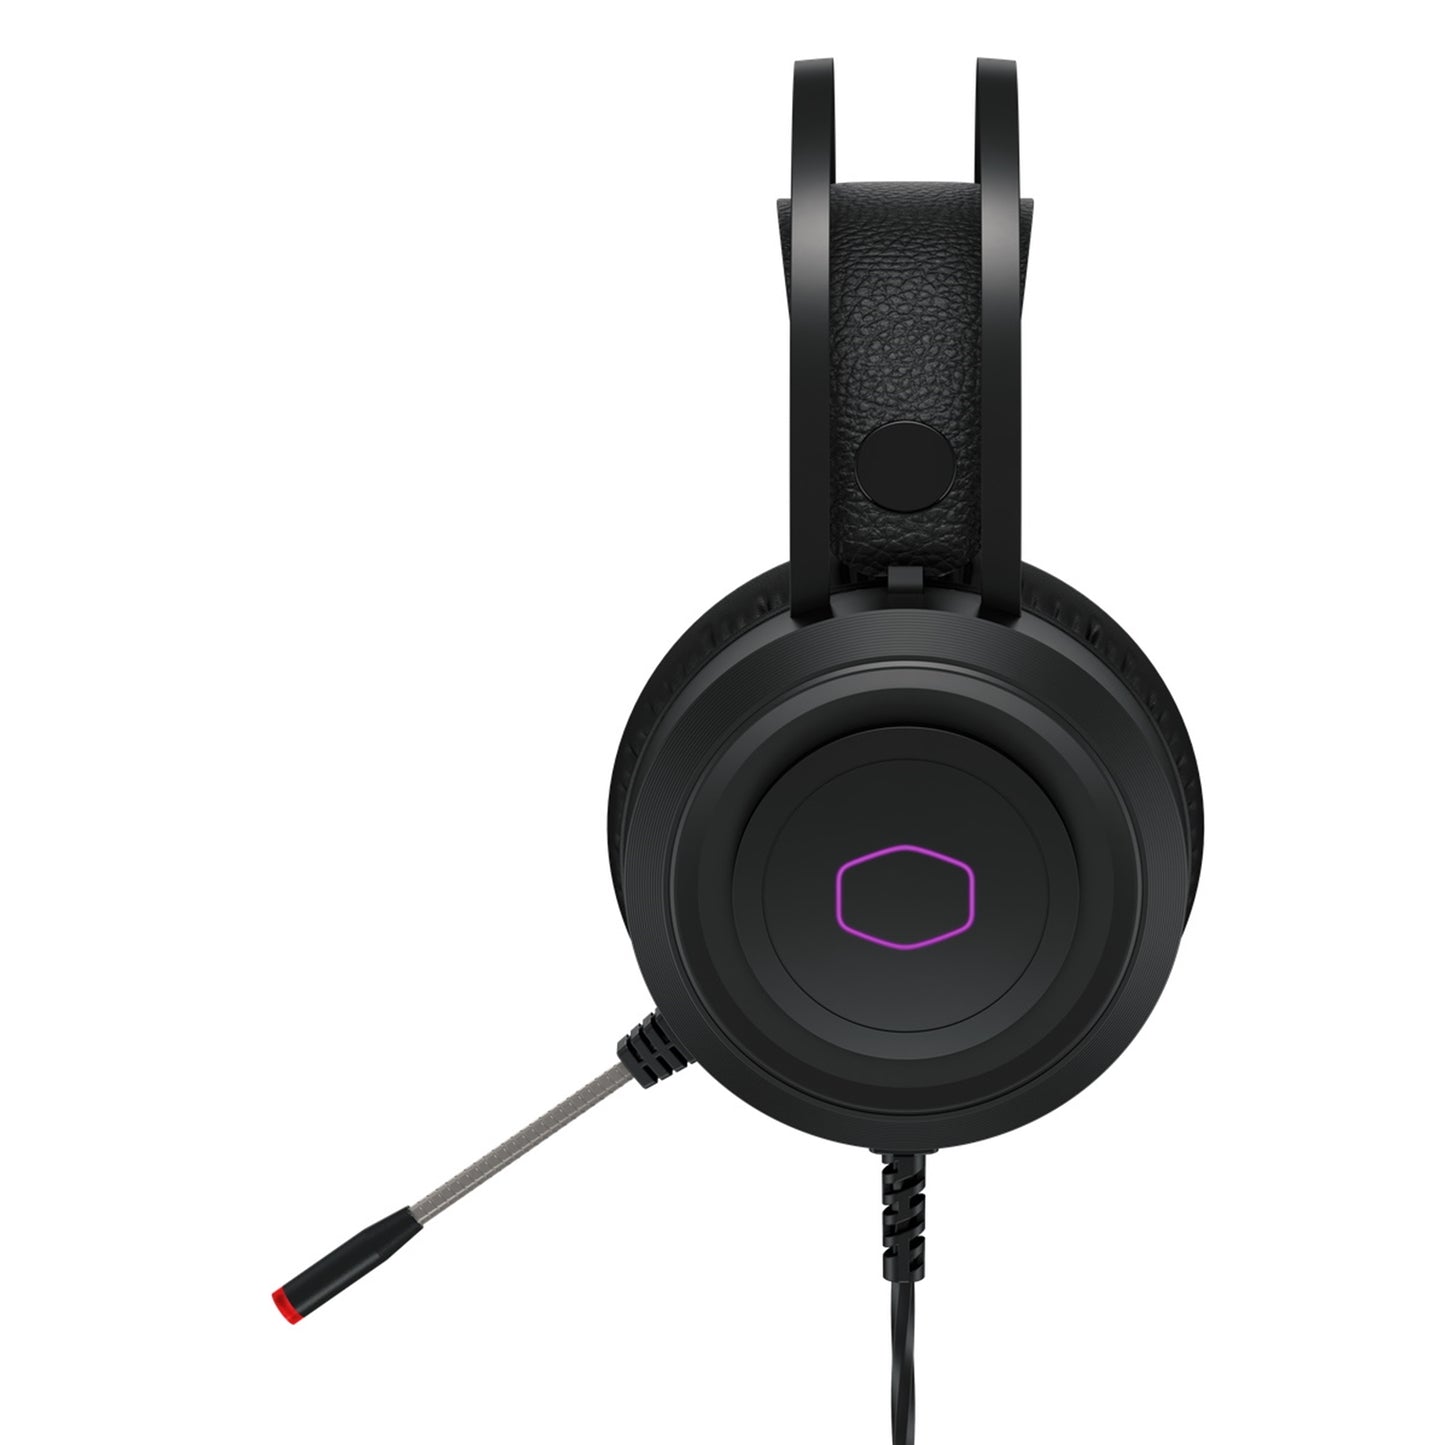 Cooler Master CH321 Gaming Headset, USB Type-A, RGB Logo - PC, Xbox One, PS3 and PS4 Compatible